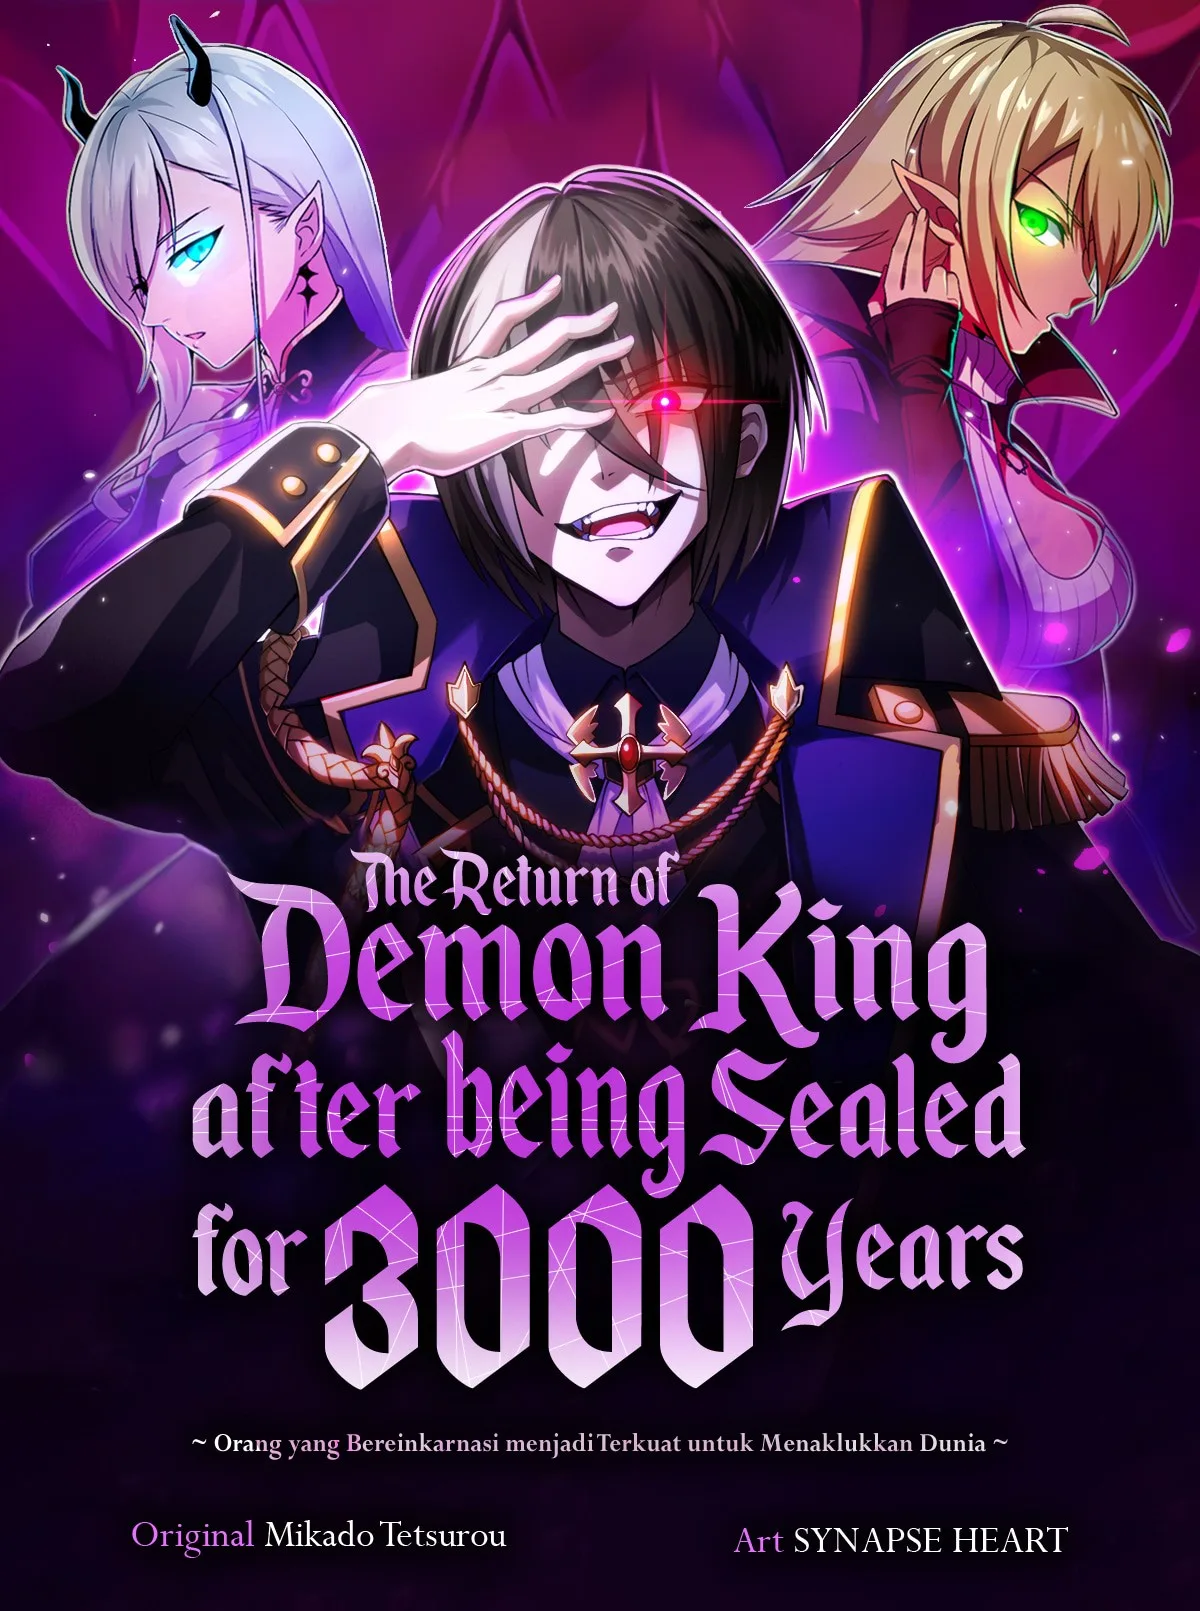 The Return of Demon King After Being Sealed for 3000 Years